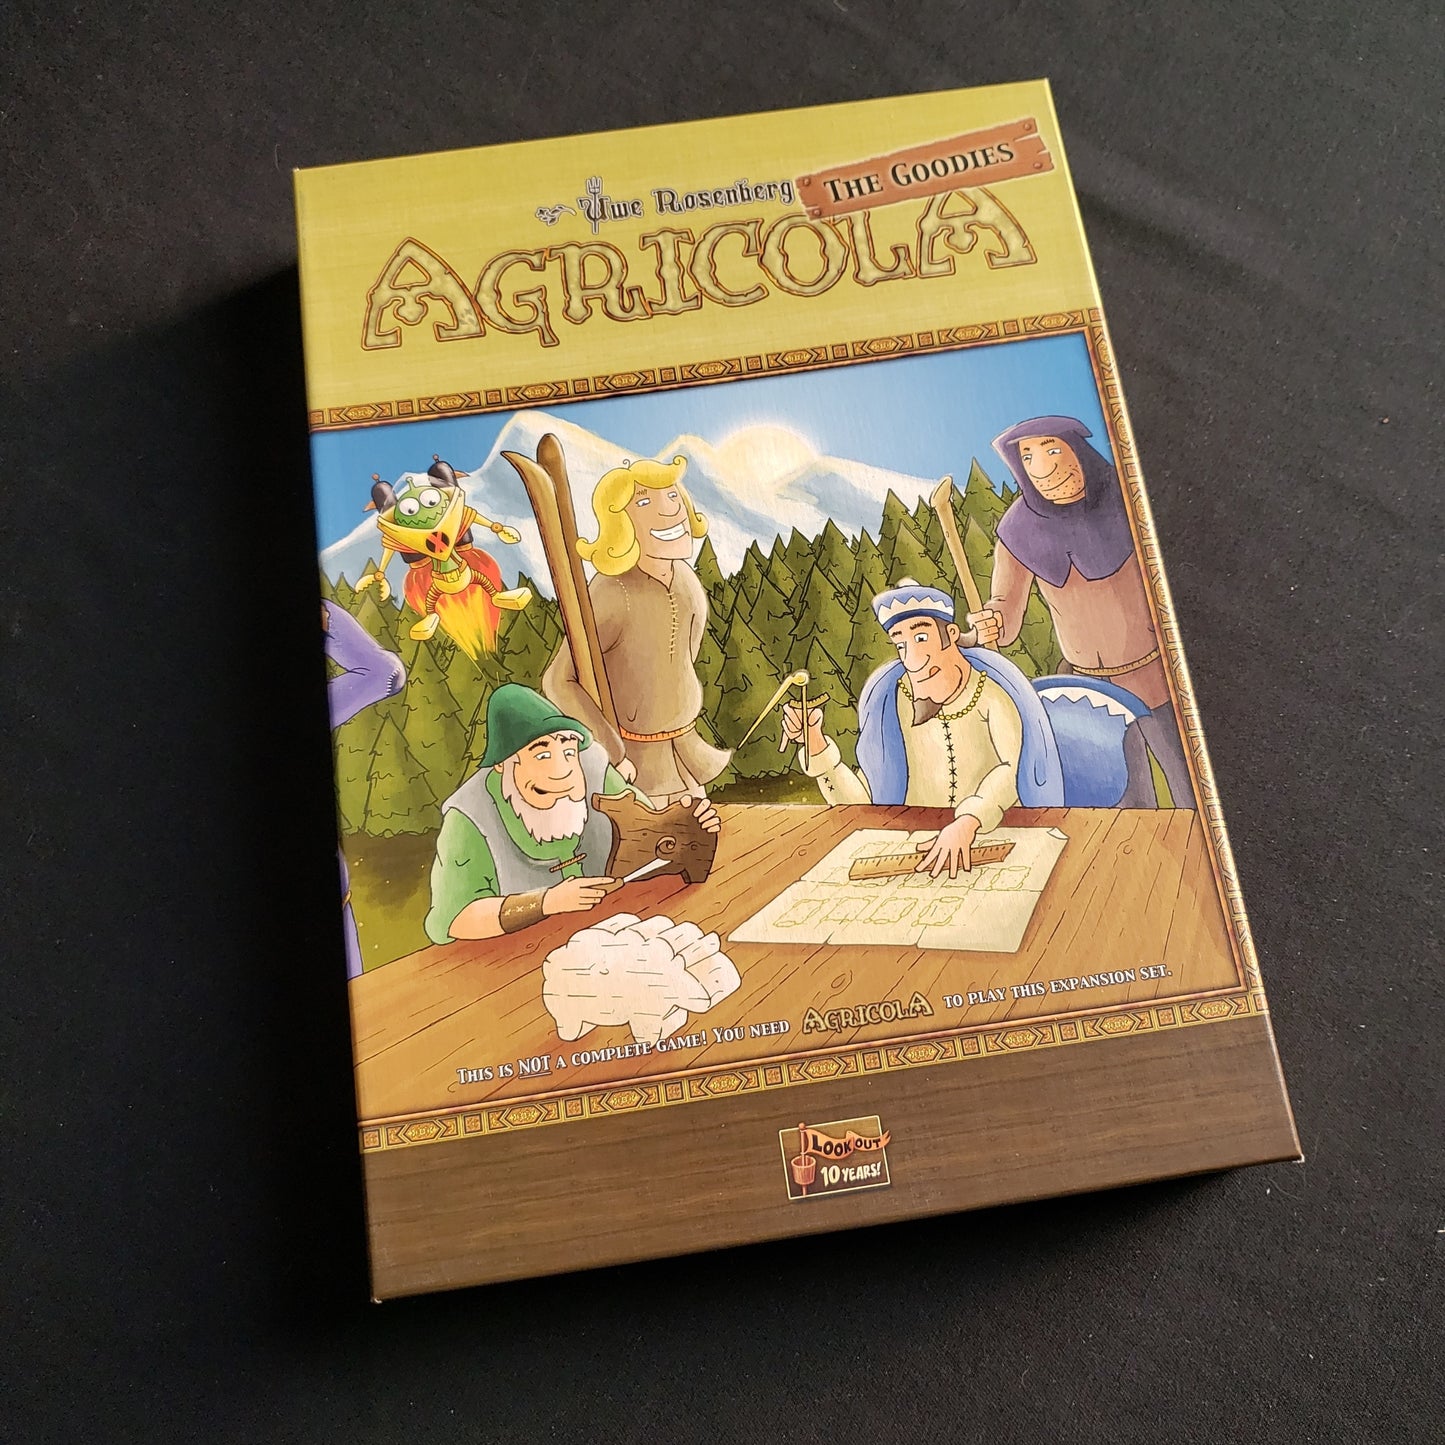 Image shows the front of the box for the Goodies Expansion for the Agricola board game